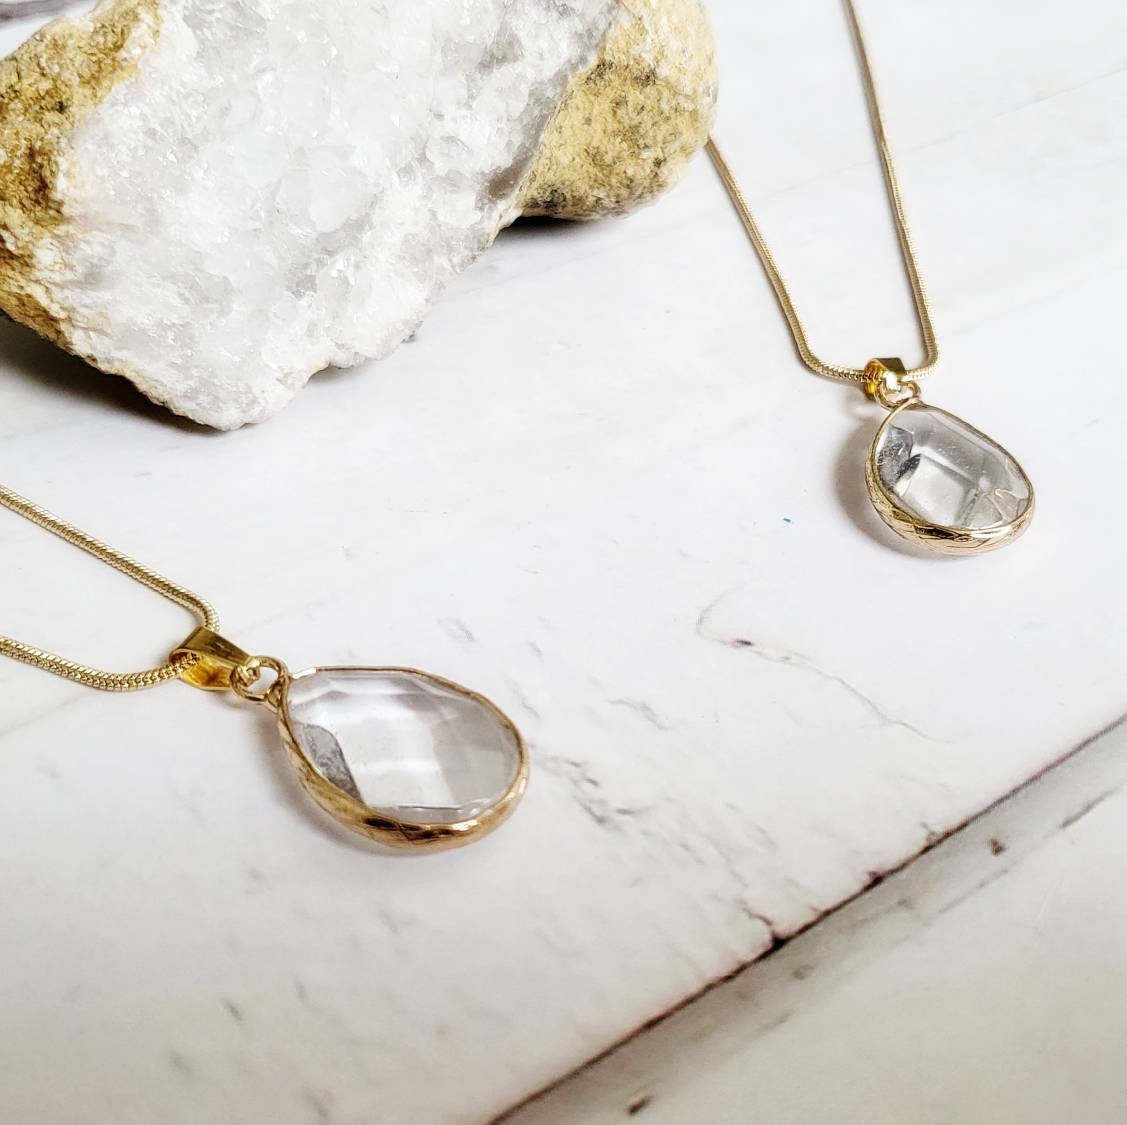 CLEAR QUARTZ | Gold Snake Chain Cryst Necklace | Gemstone for Clarity, Harmony, Amplification | Minimalist Metaphysical Spiritual Jewelry